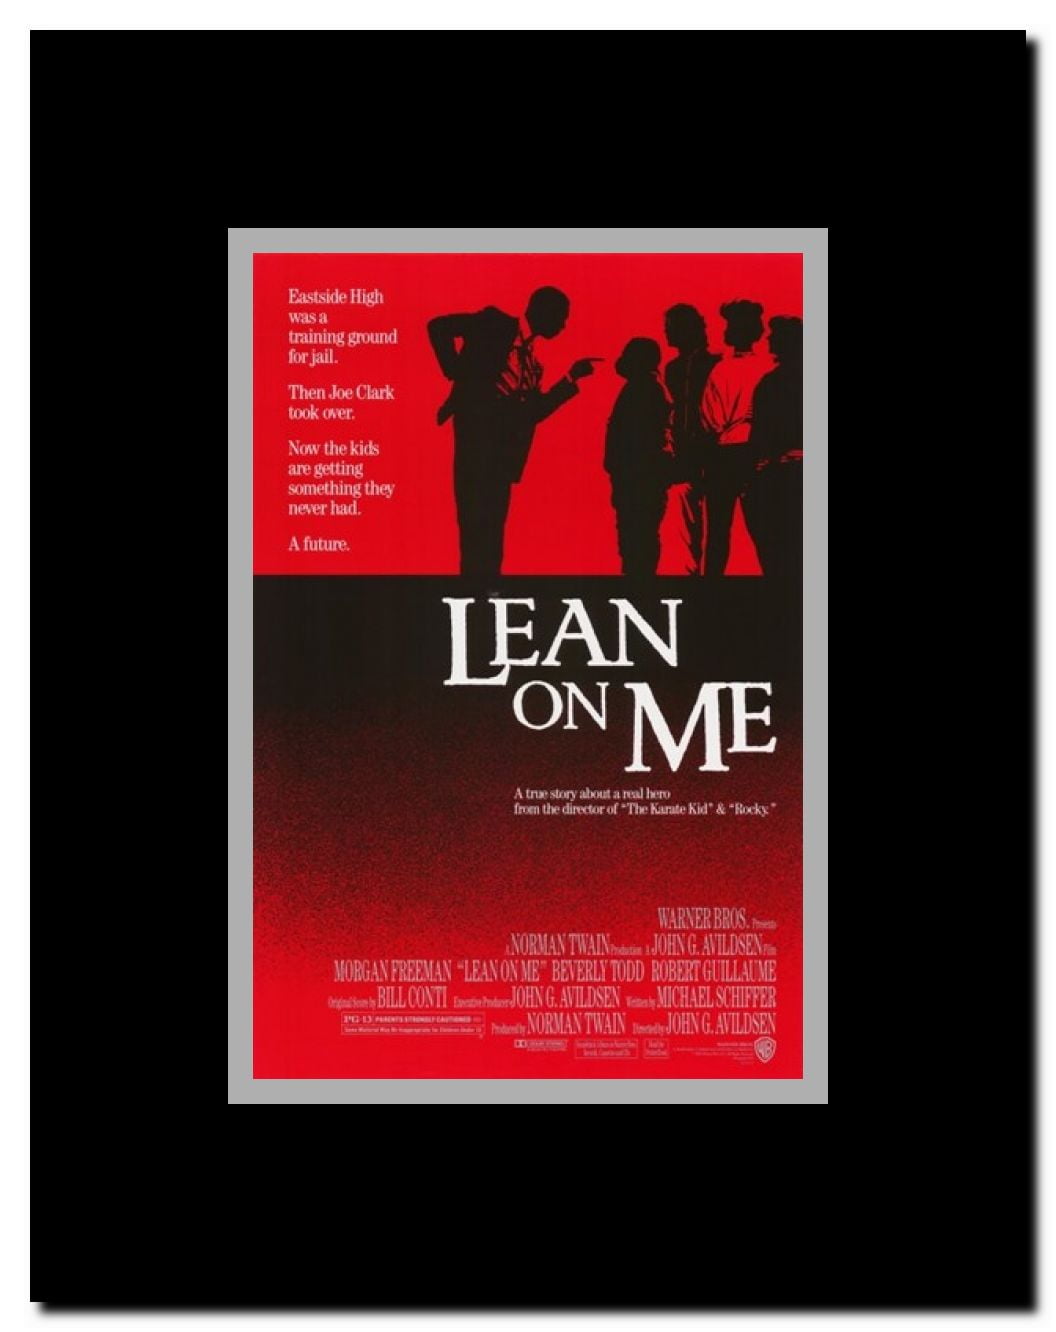 Collection of Lean on me movie For Free